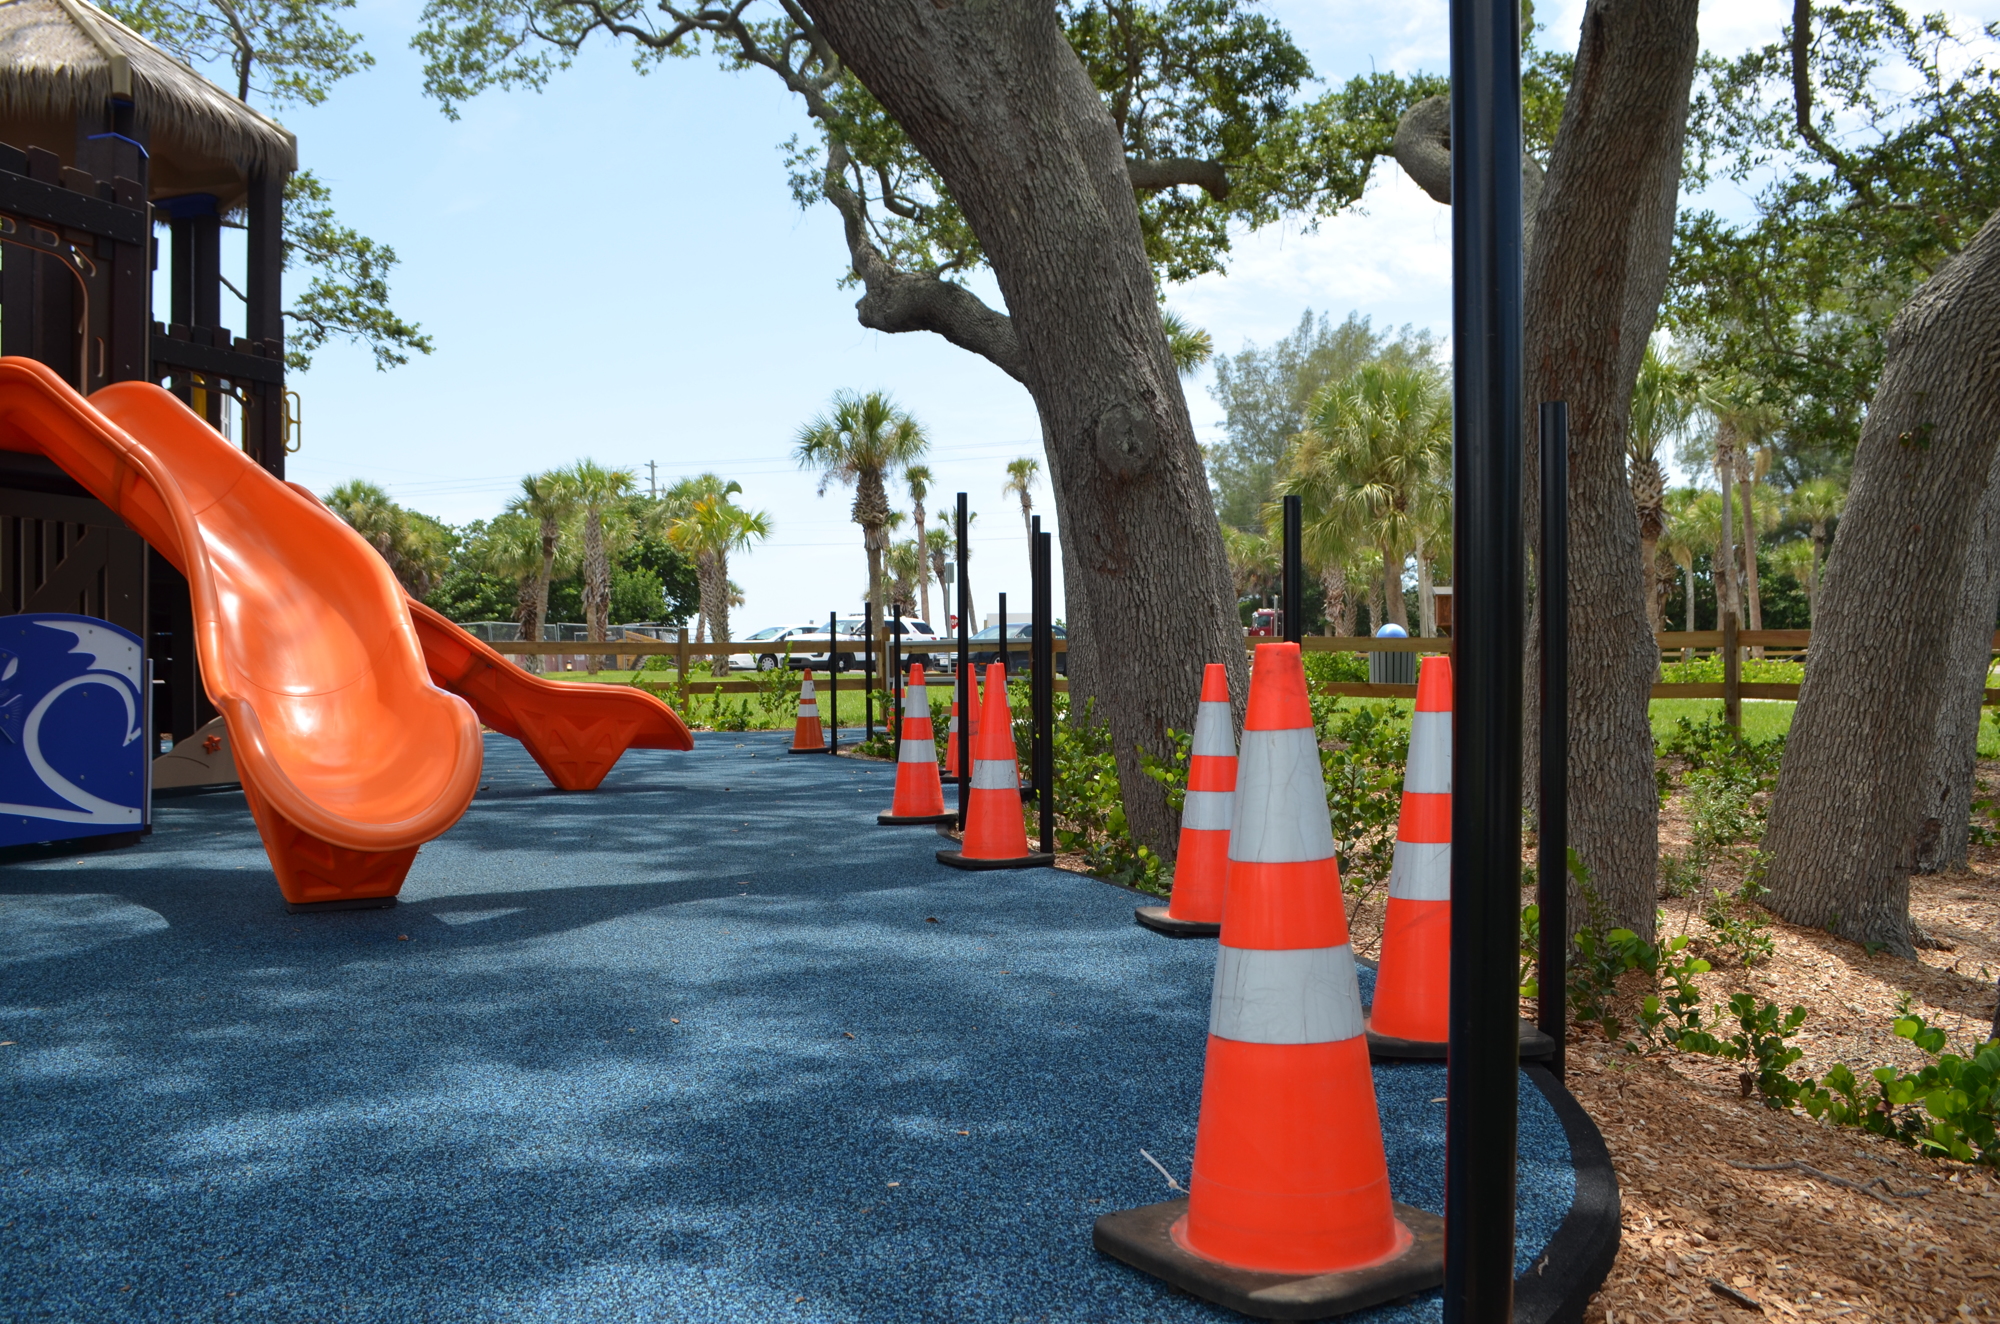 Sarasota County officials requested a fence in the park's playground area to prevent falls.